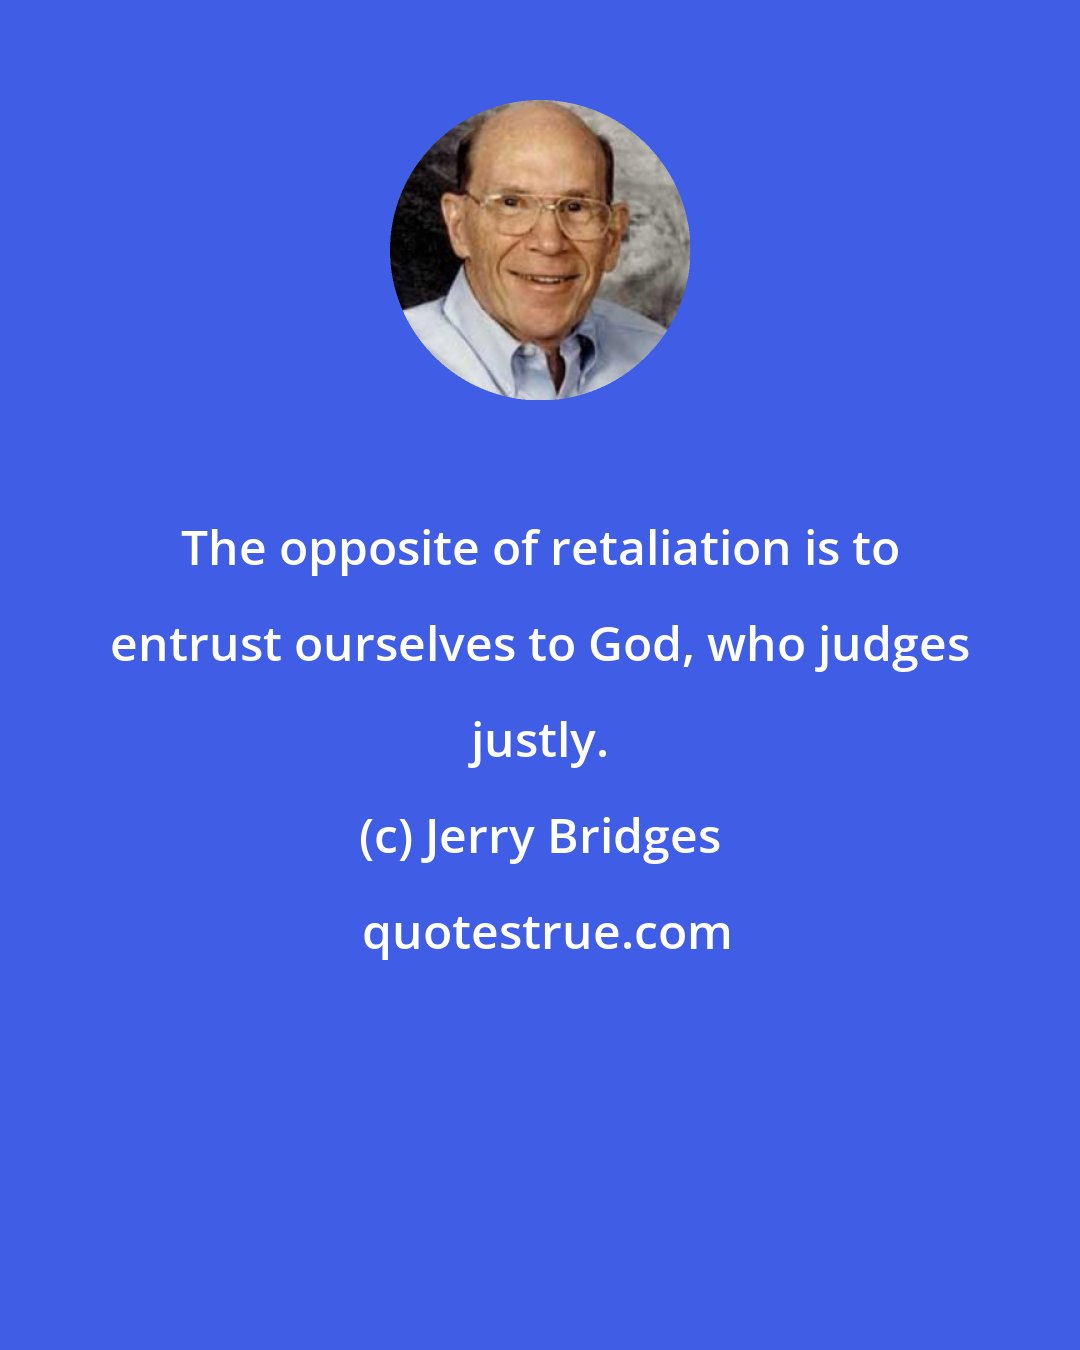 Jerry Bridges: The opposite of retaliation is to entrust ourselves to God, who judges justly.